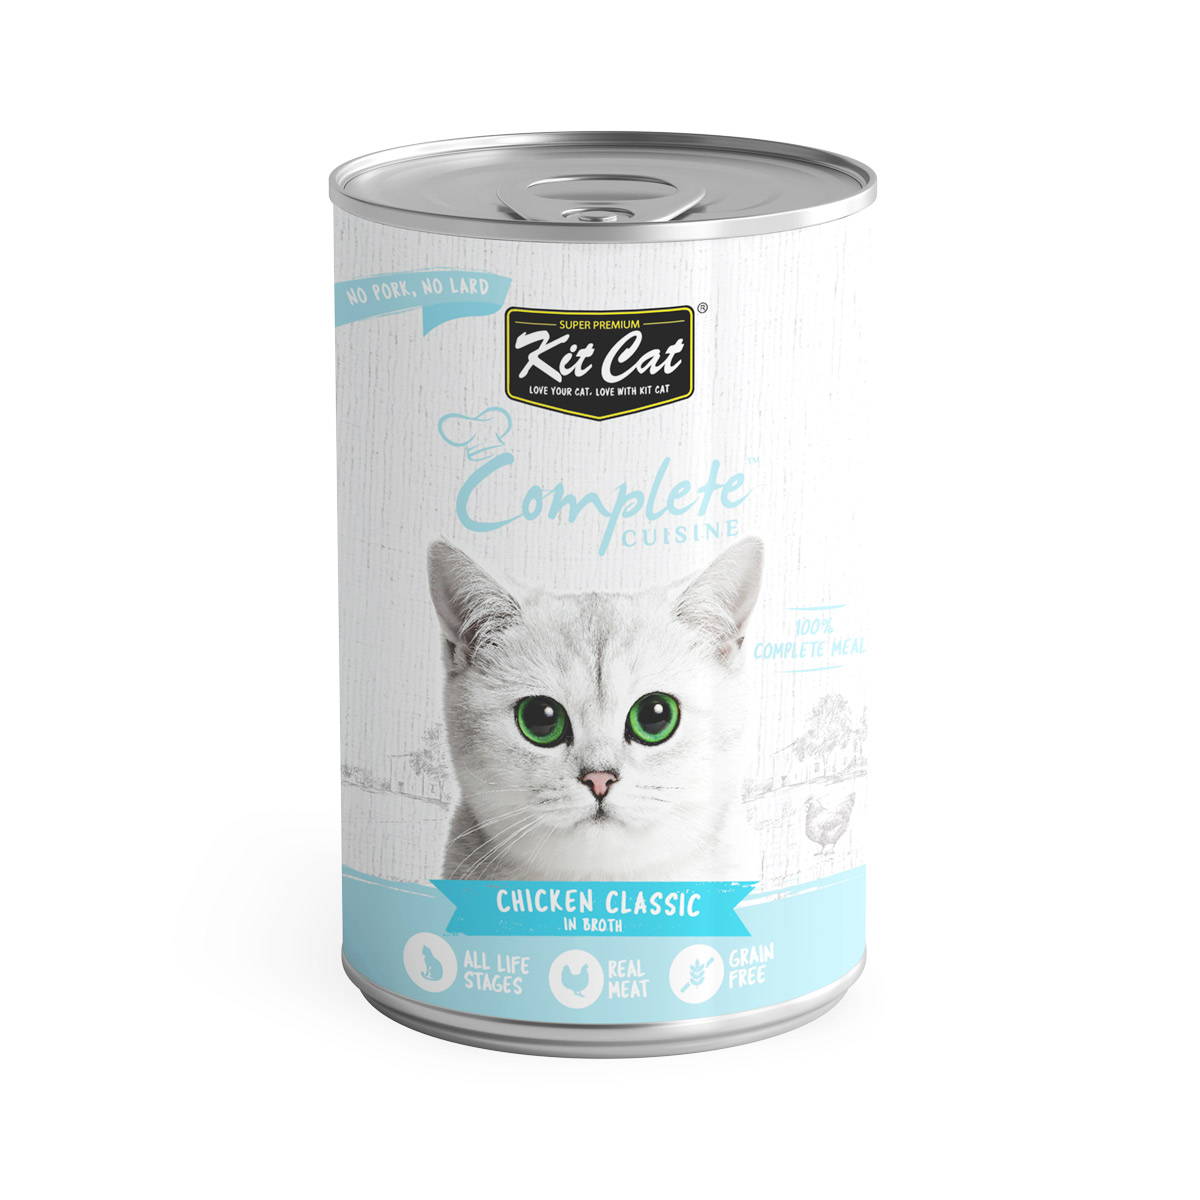 Kit Cat Complete Cuisine Chicken Classic In Broth 150G